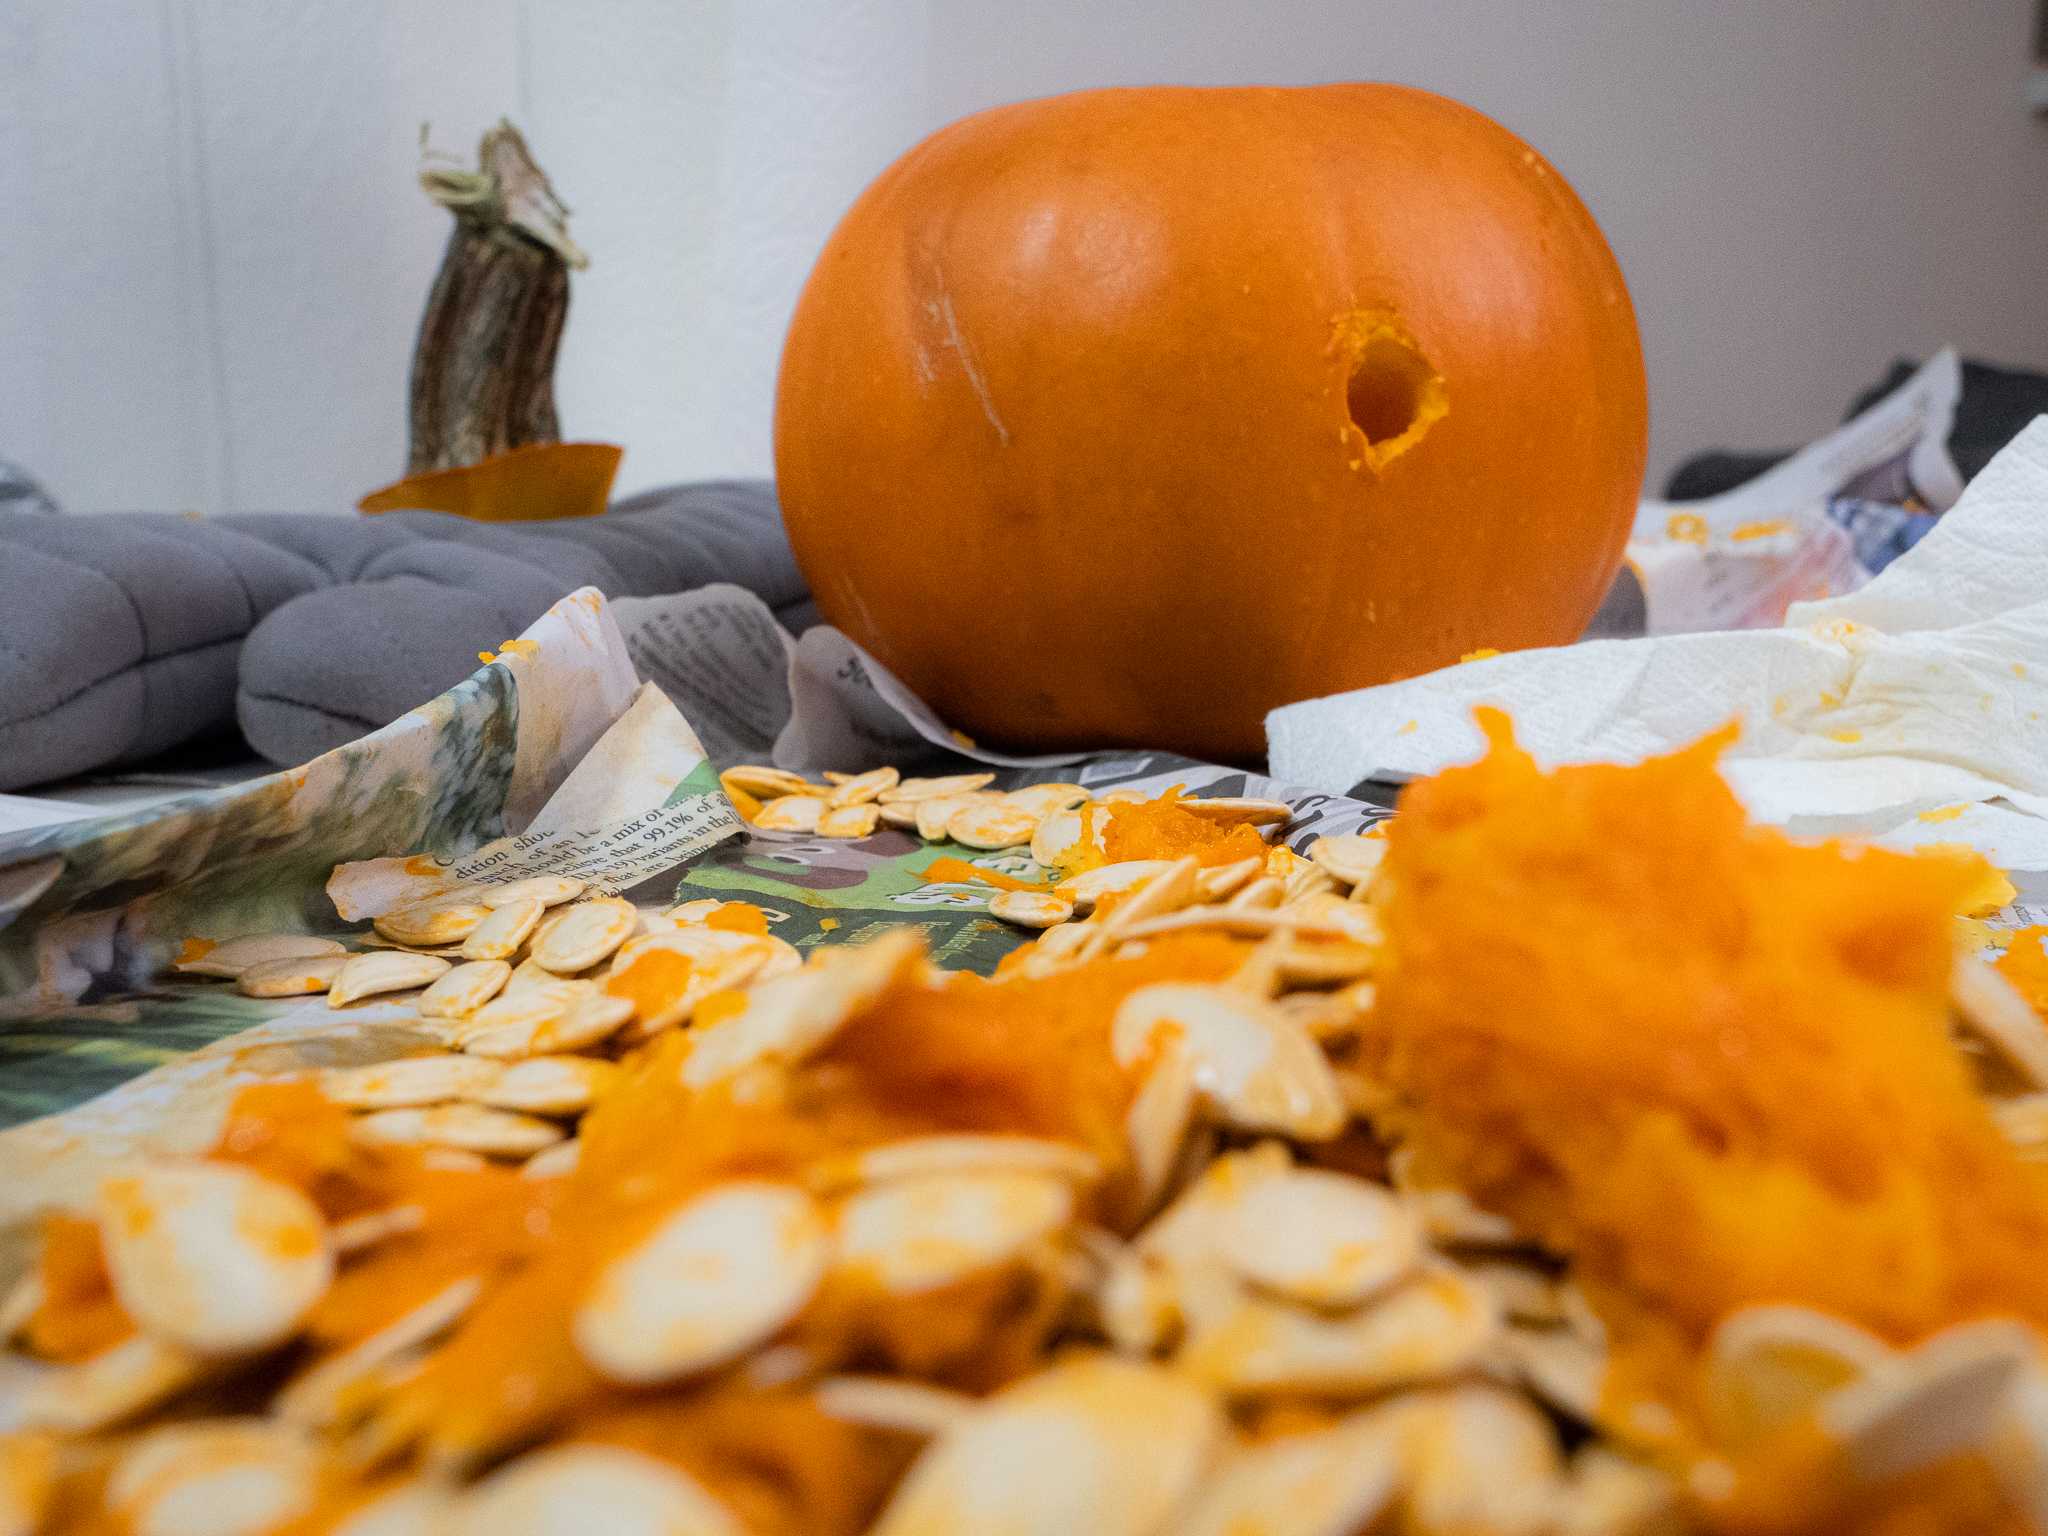 Pumpkin guts and seeds laid out in front of a pumpkin